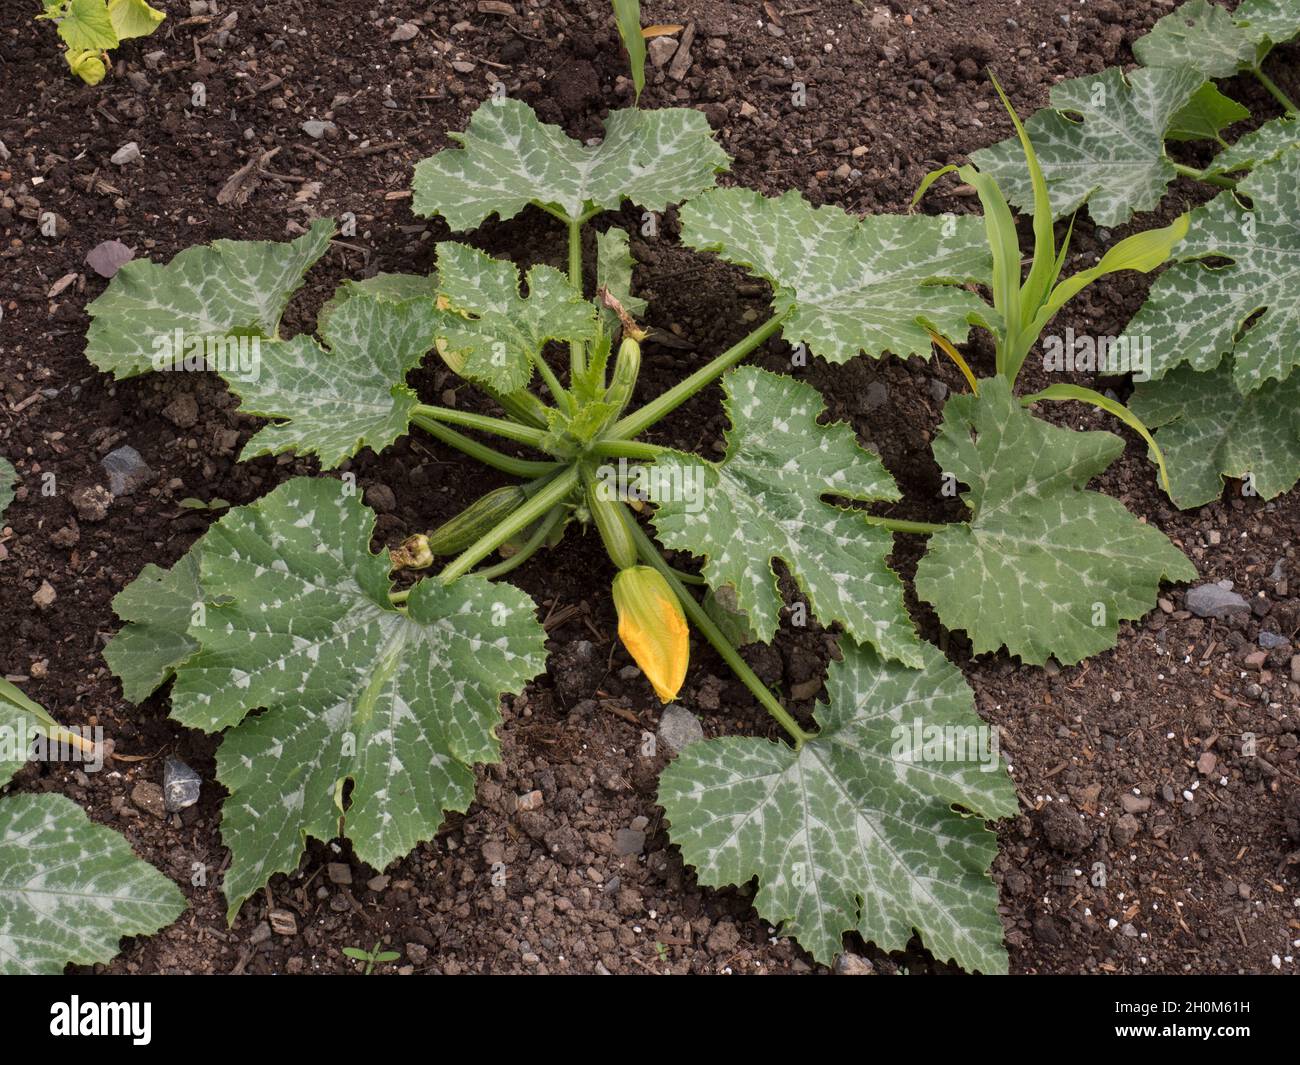 Courgettes growing on vegetable patch, Wales, UK Stock Photo